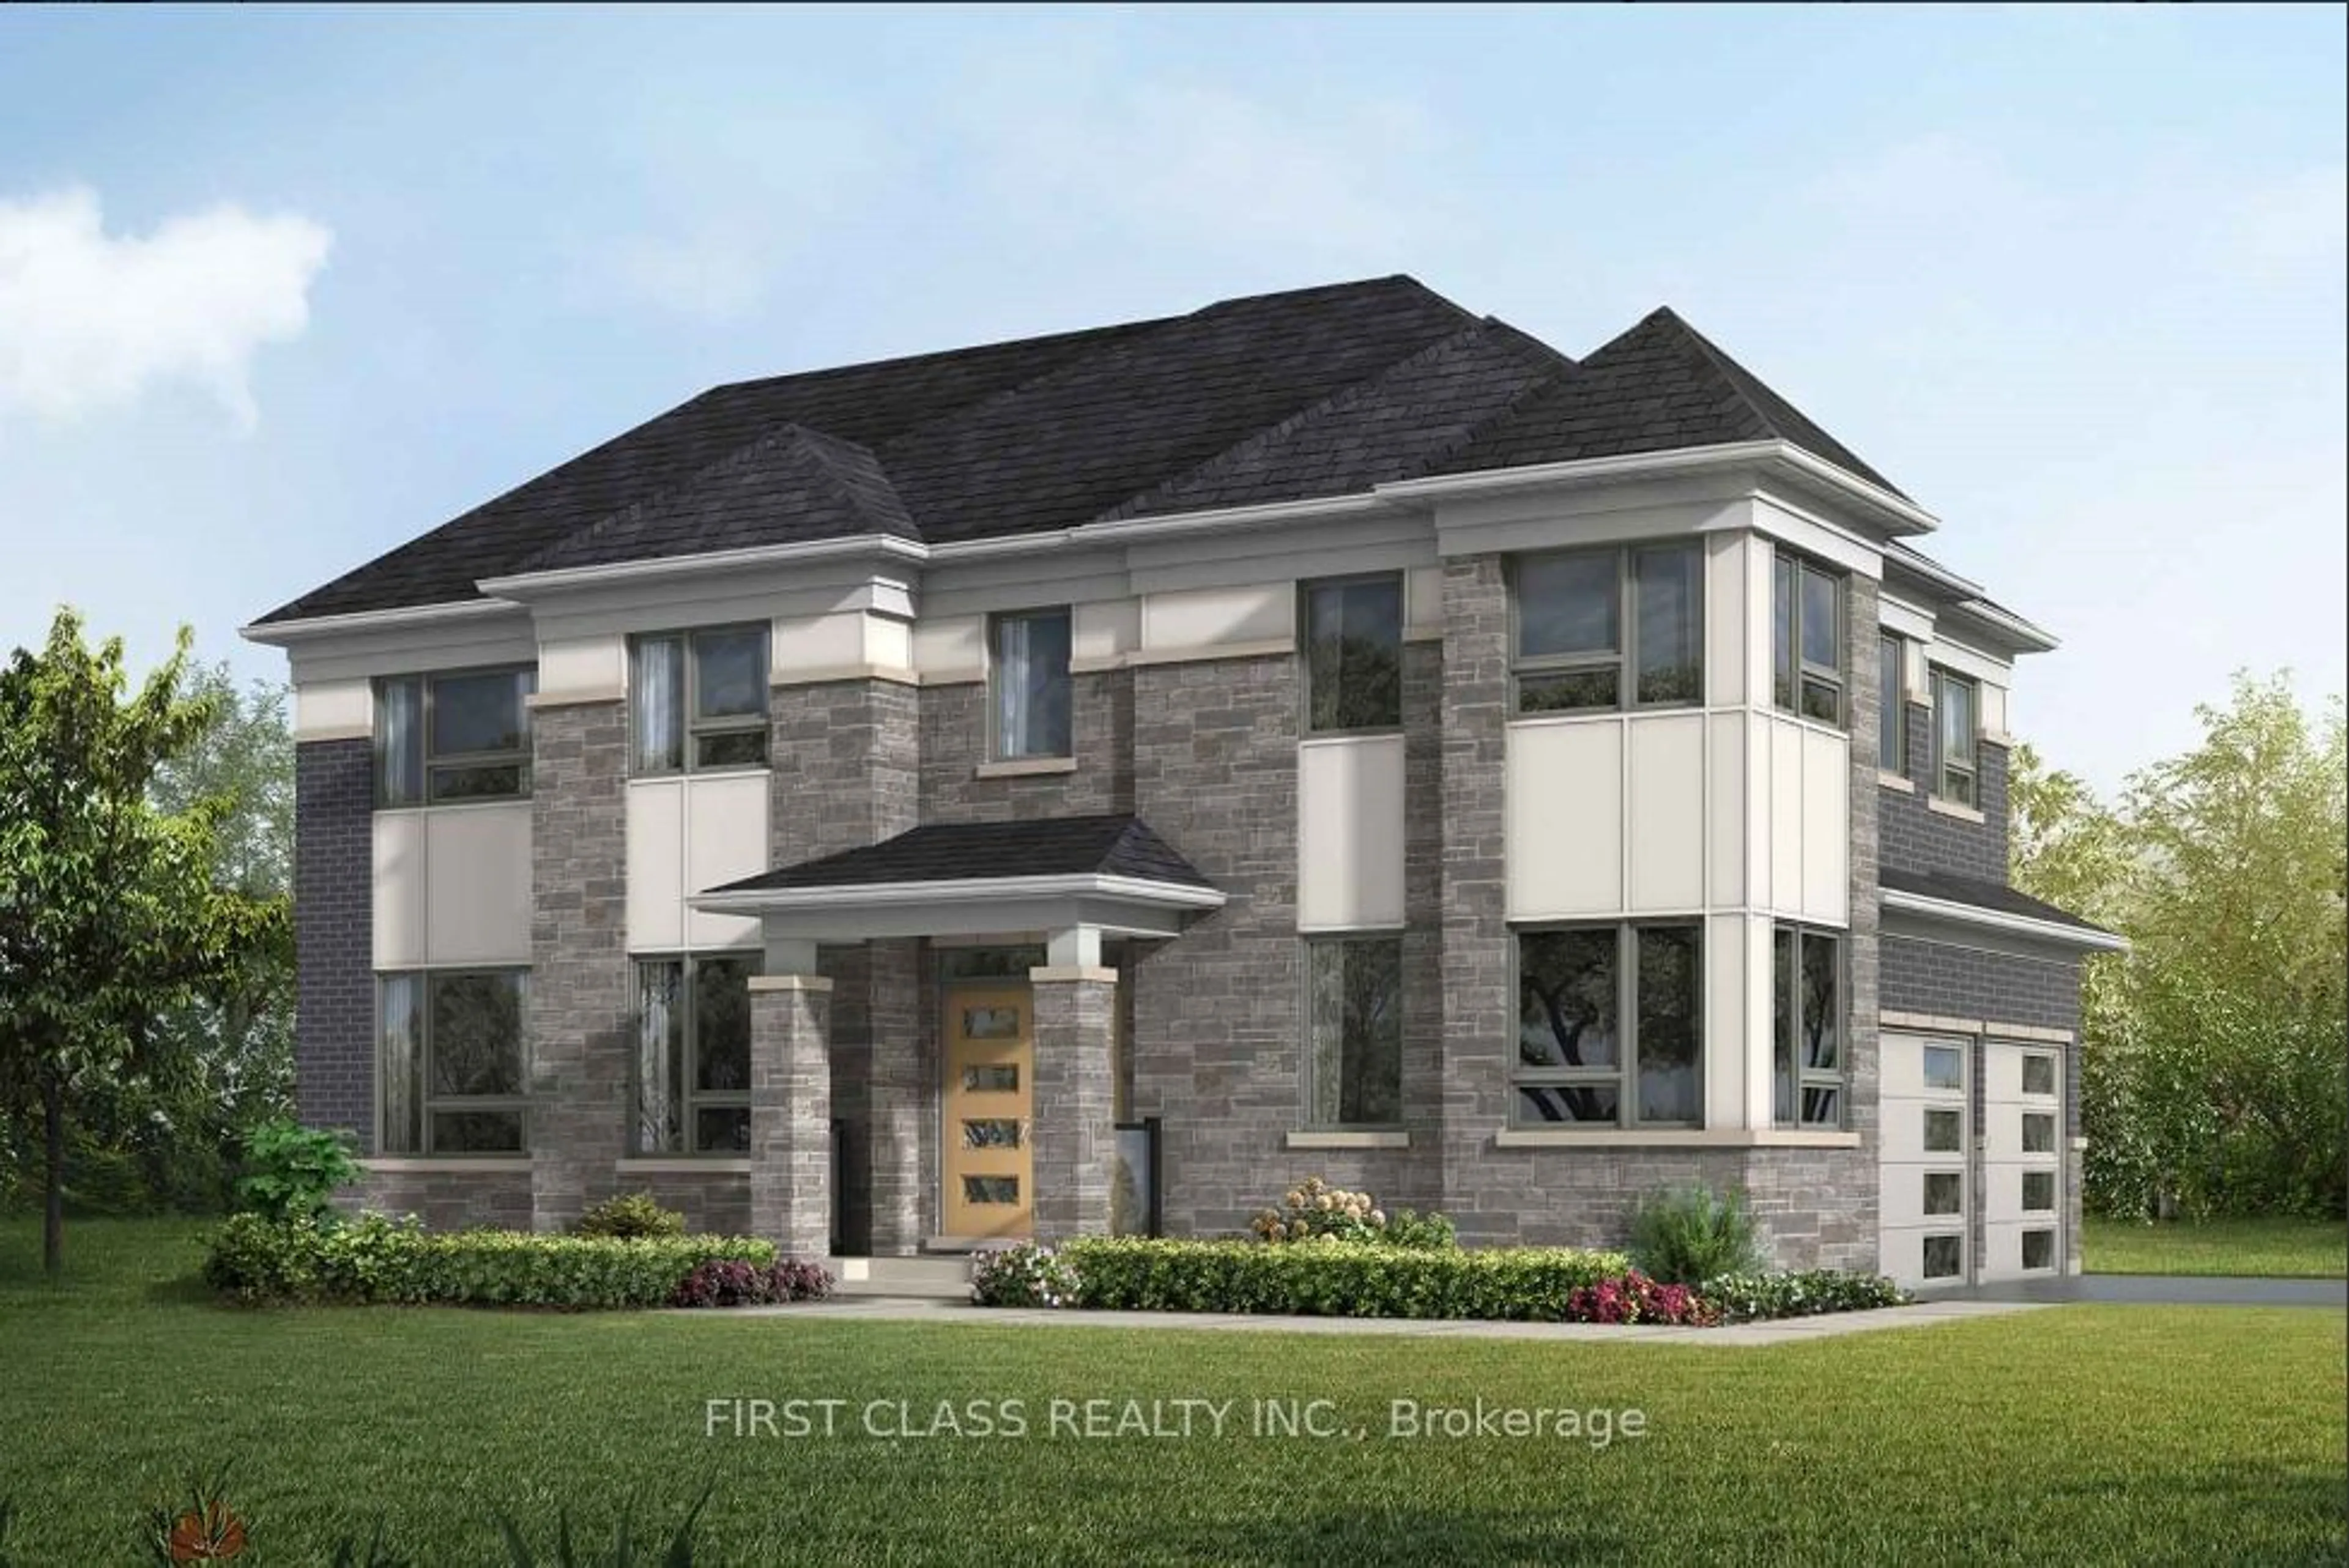 Home with brick exterior material for 1400 Mockingbird Sq, Pickering Ontario L1X 0N8